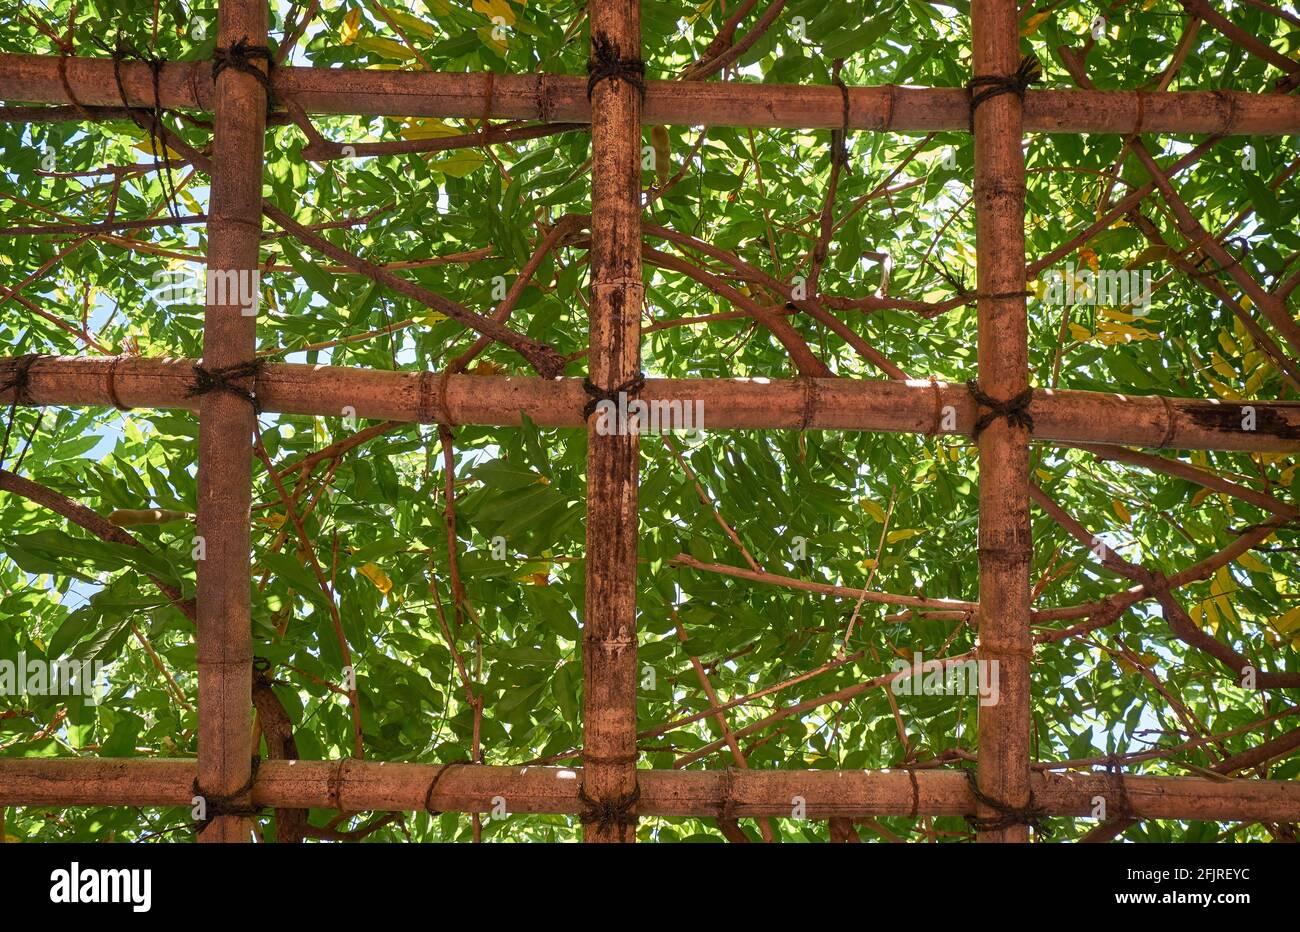 The view of bamboo pergola trellis supporting the liana tree in the japanese garden. Japan Stock Photo